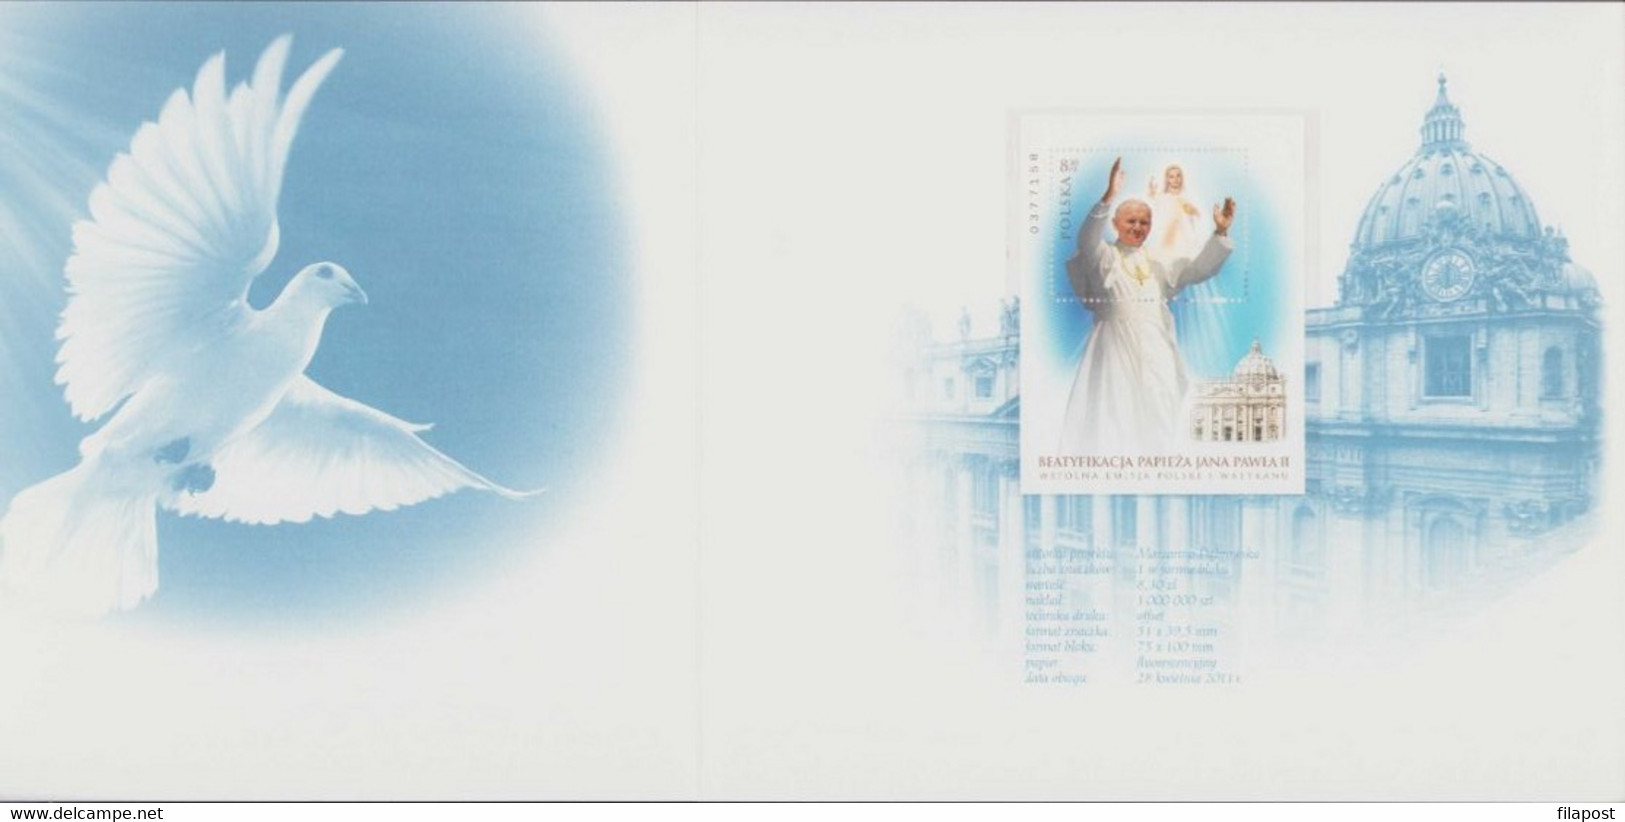 POLAND 2011 Souvenir Booklet / Beatification Of John Paul II Pope - Common Issue With Vatican / FDC + Block MNH** F - Libretti